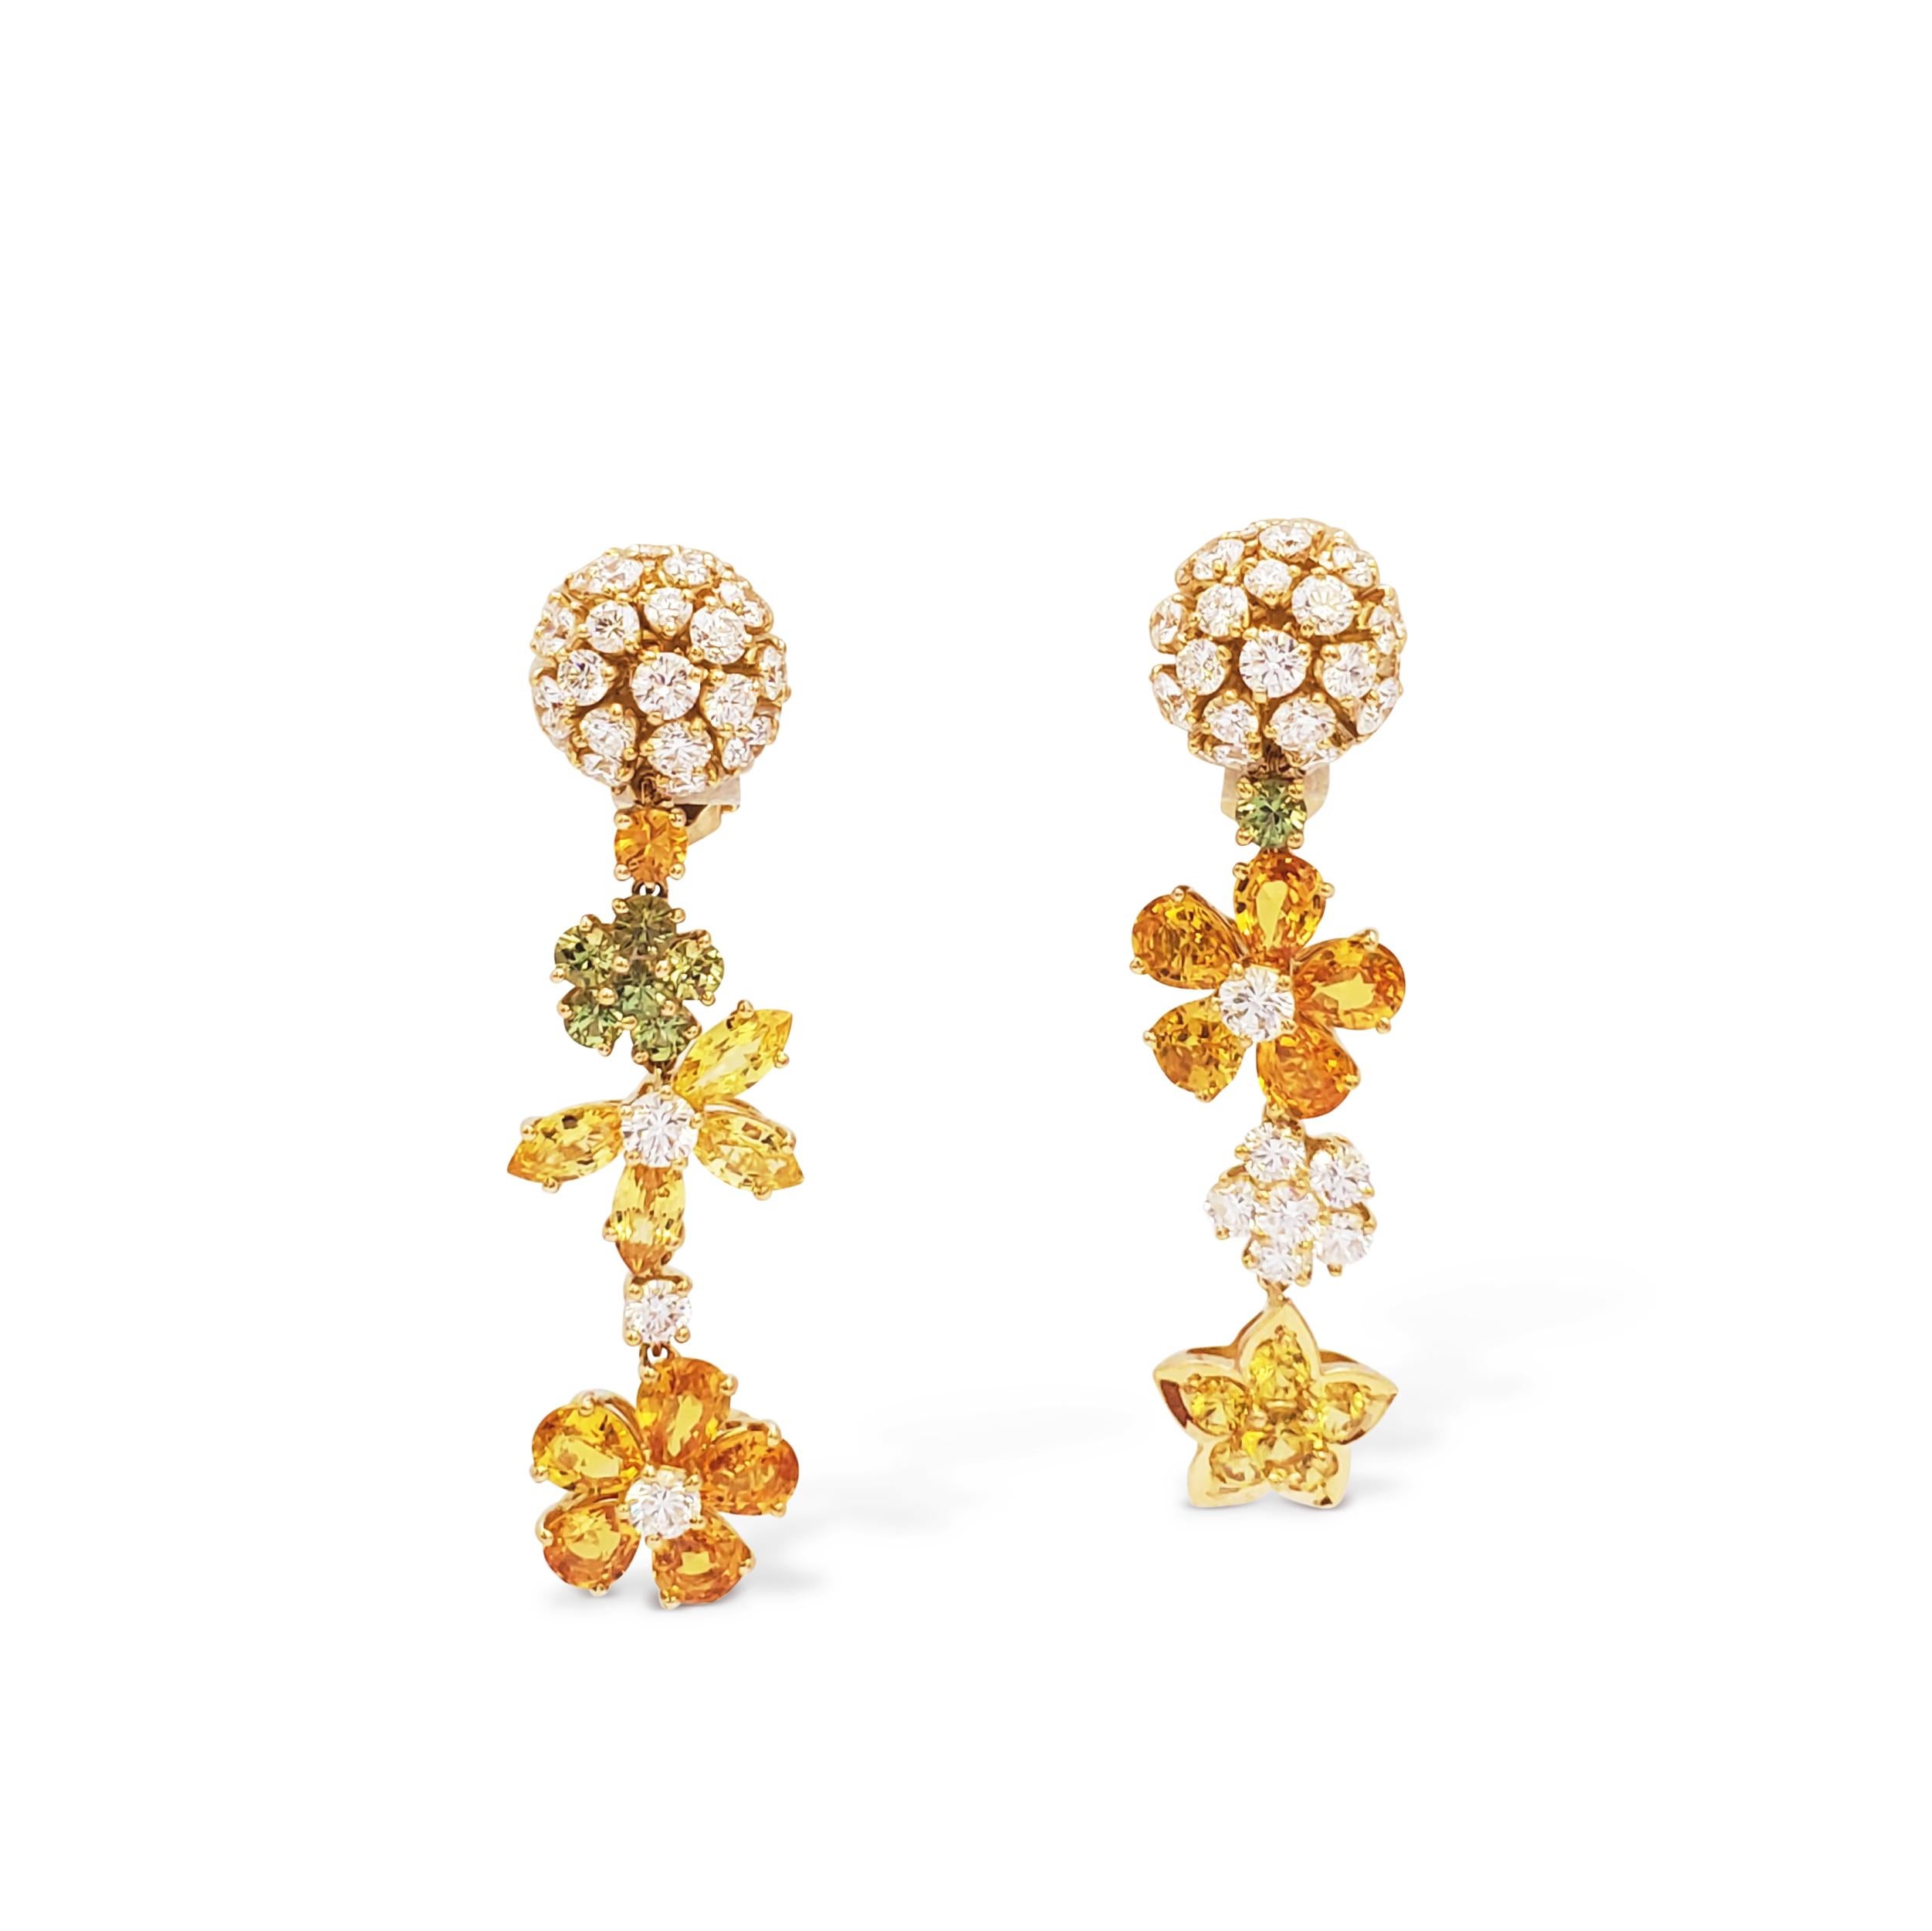 Authentic Van Cleef & Arpels Folies des Prés ear clips crafted in 18 karat yellow gold.  The dangle earrings feature a captivating mix of diamonds and sapphires in varying shapes, sizes, and colors arranged in a floral design.  

Set with round cut